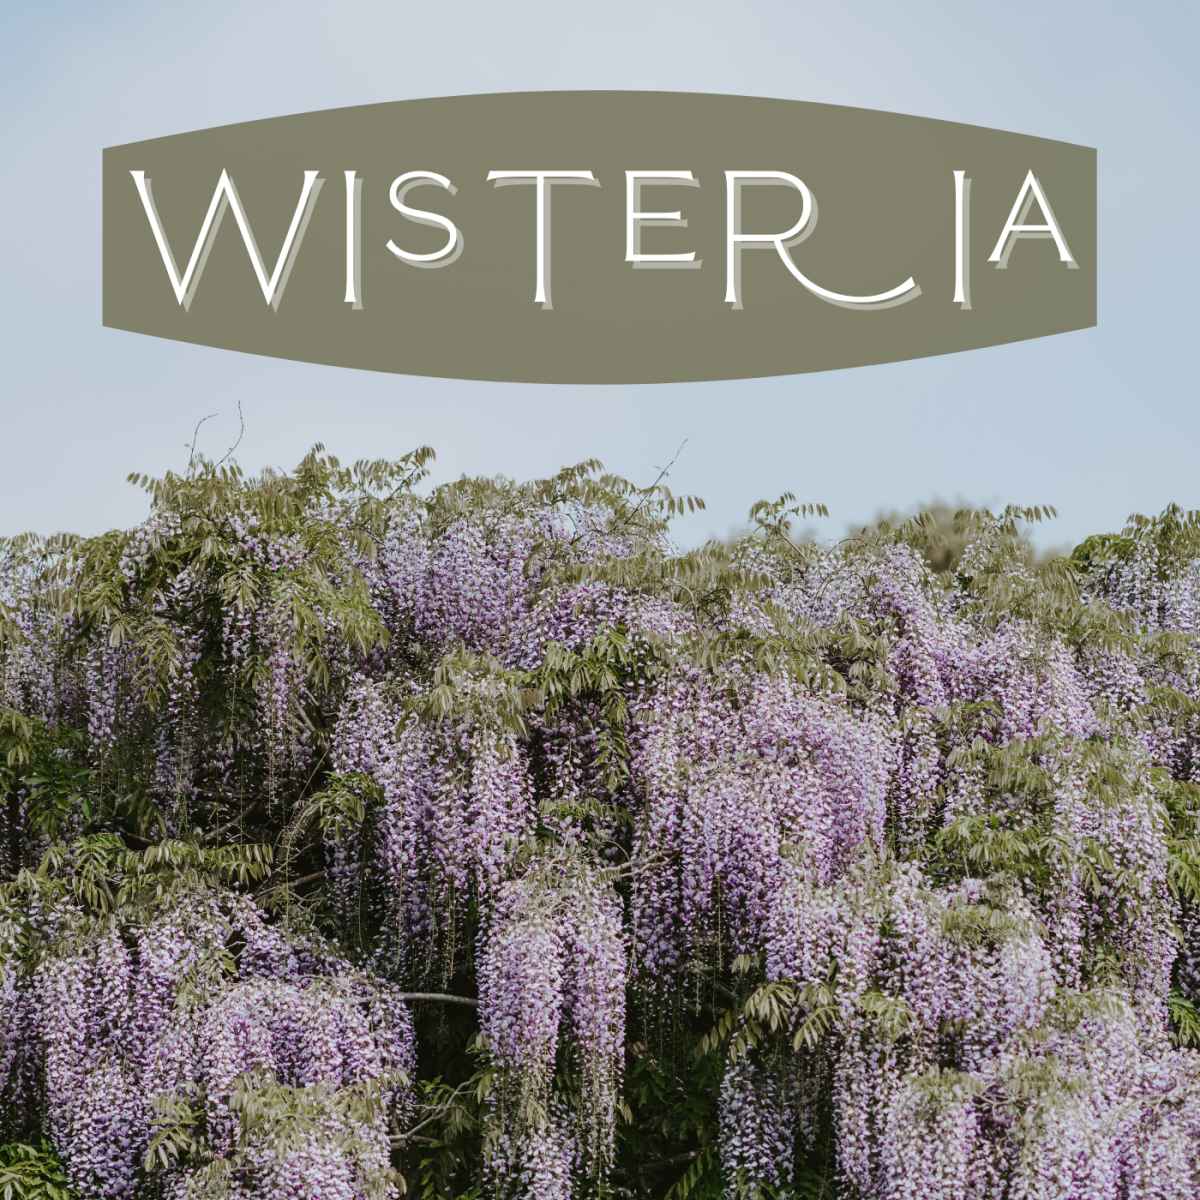 will wisteria suplant a tree it climbs